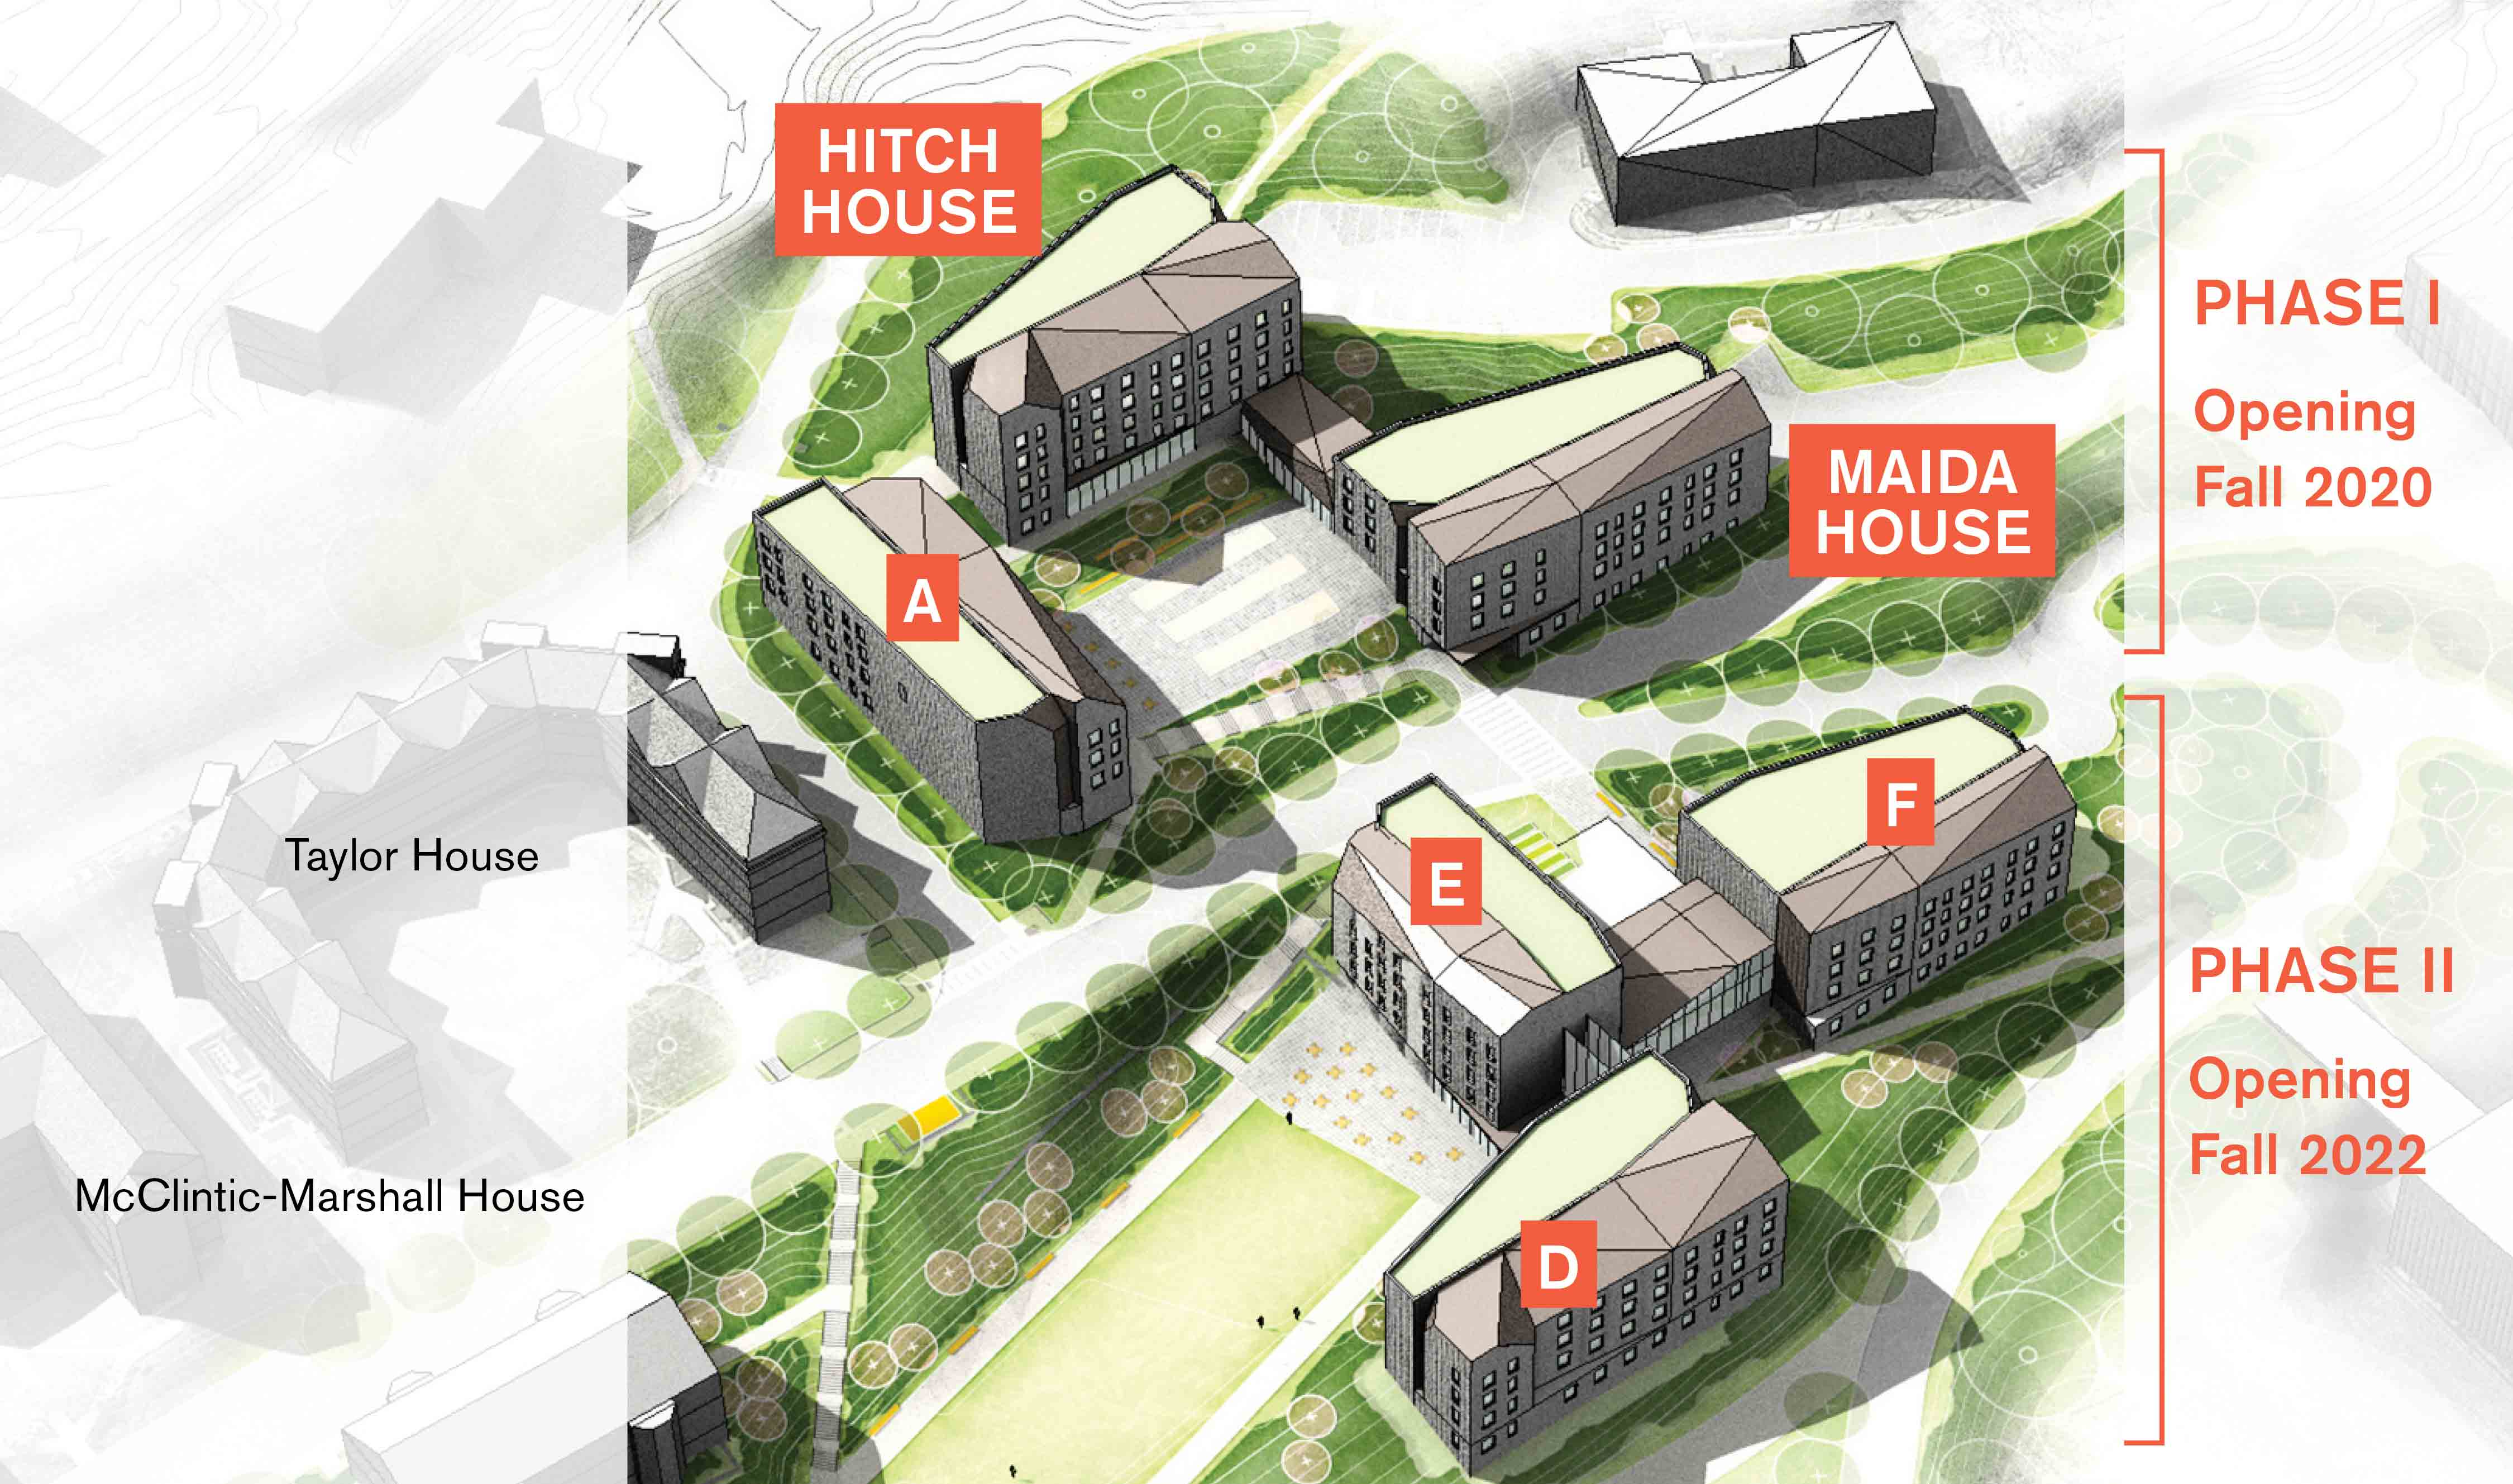 Rendering of the Hitch and Maida Houses at Lehigh University